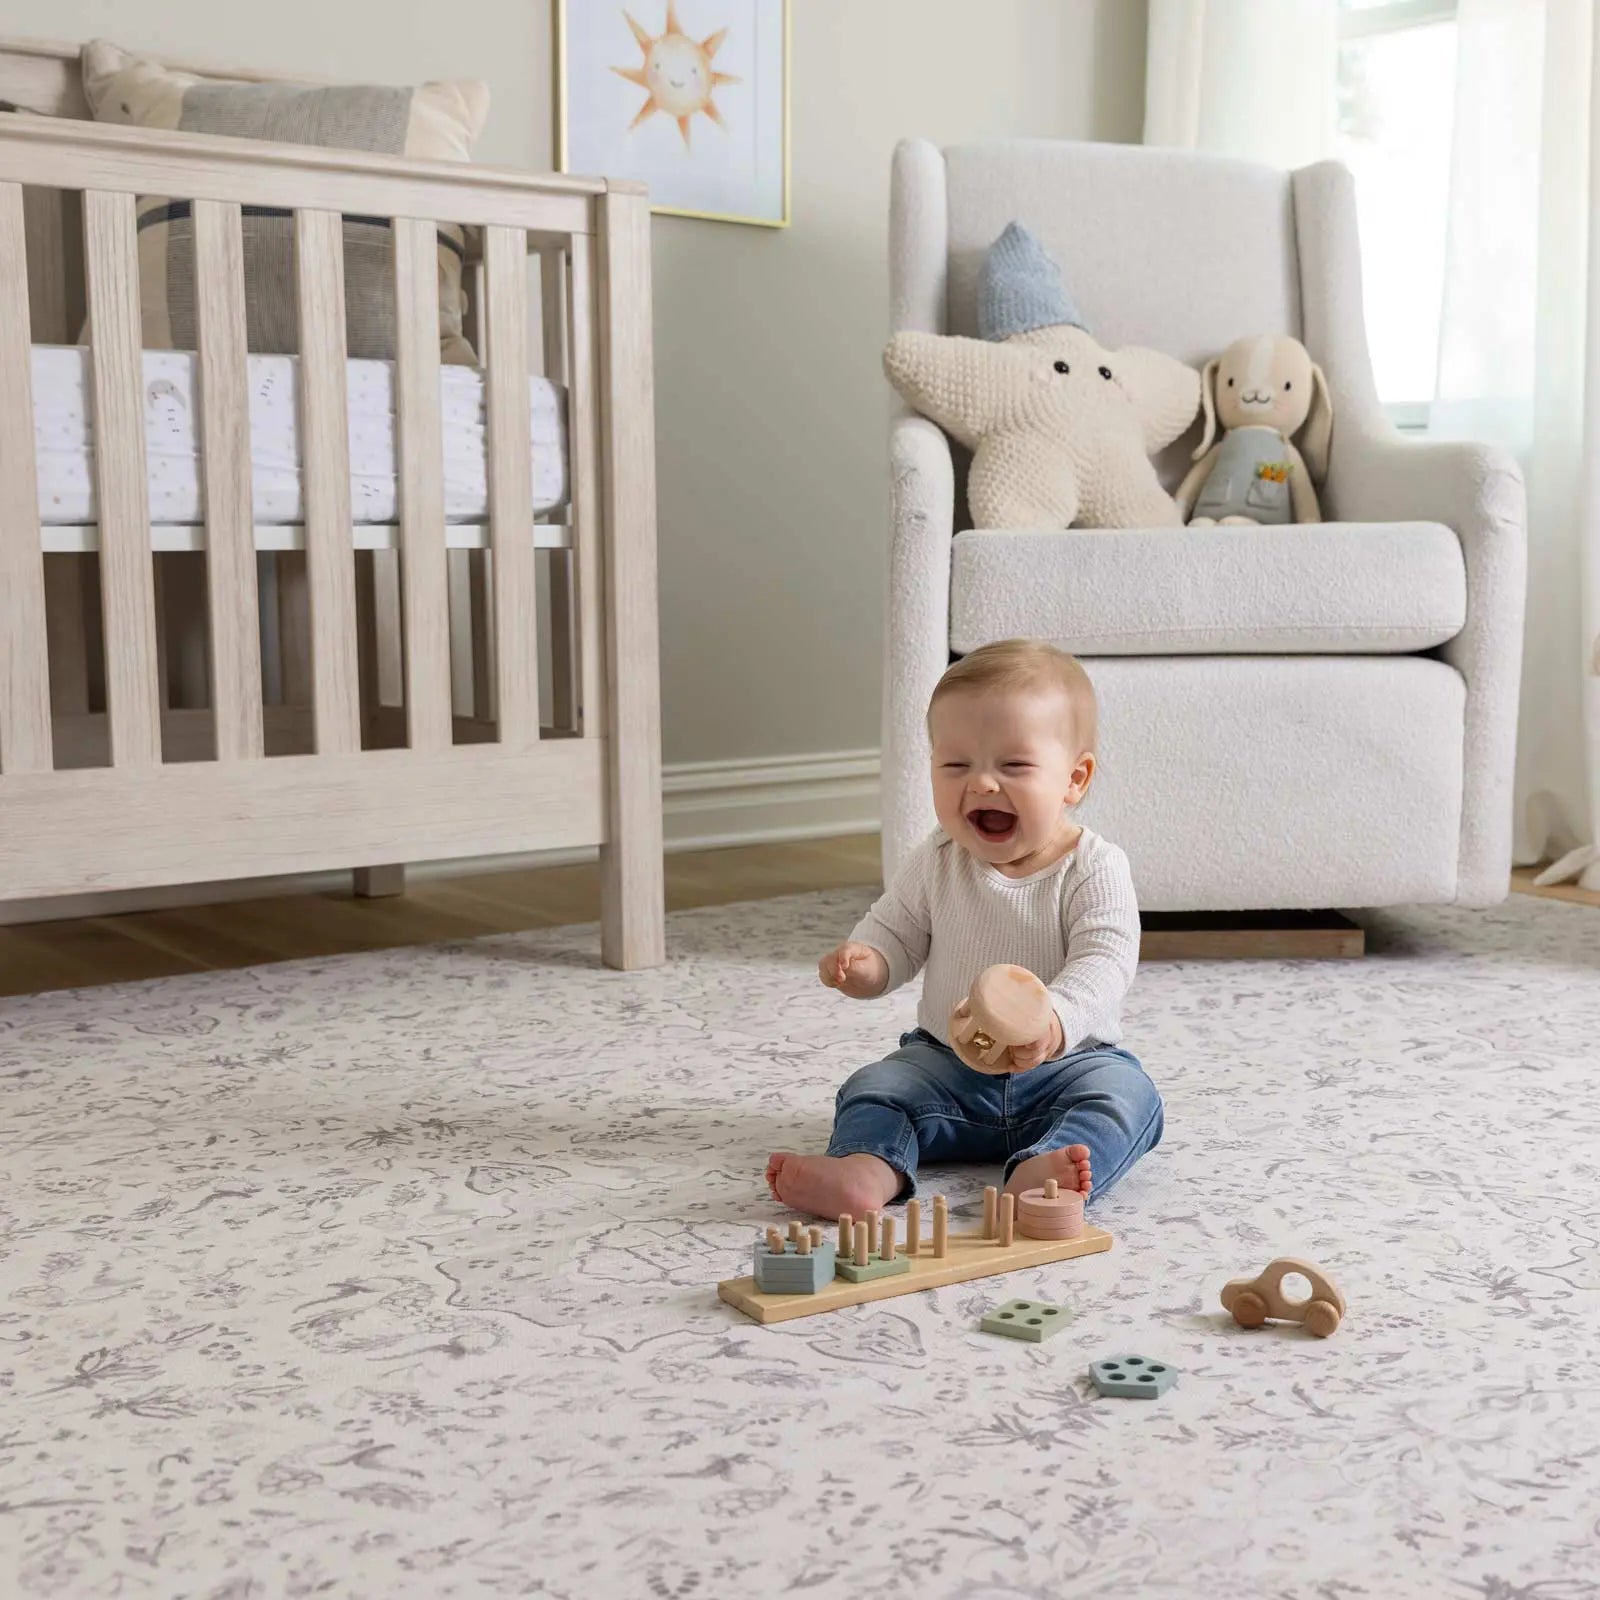 Emile latte neutral floral play mat shown in nursery with baby sitting on mat playing with wooden toys and laughing shaking his hands